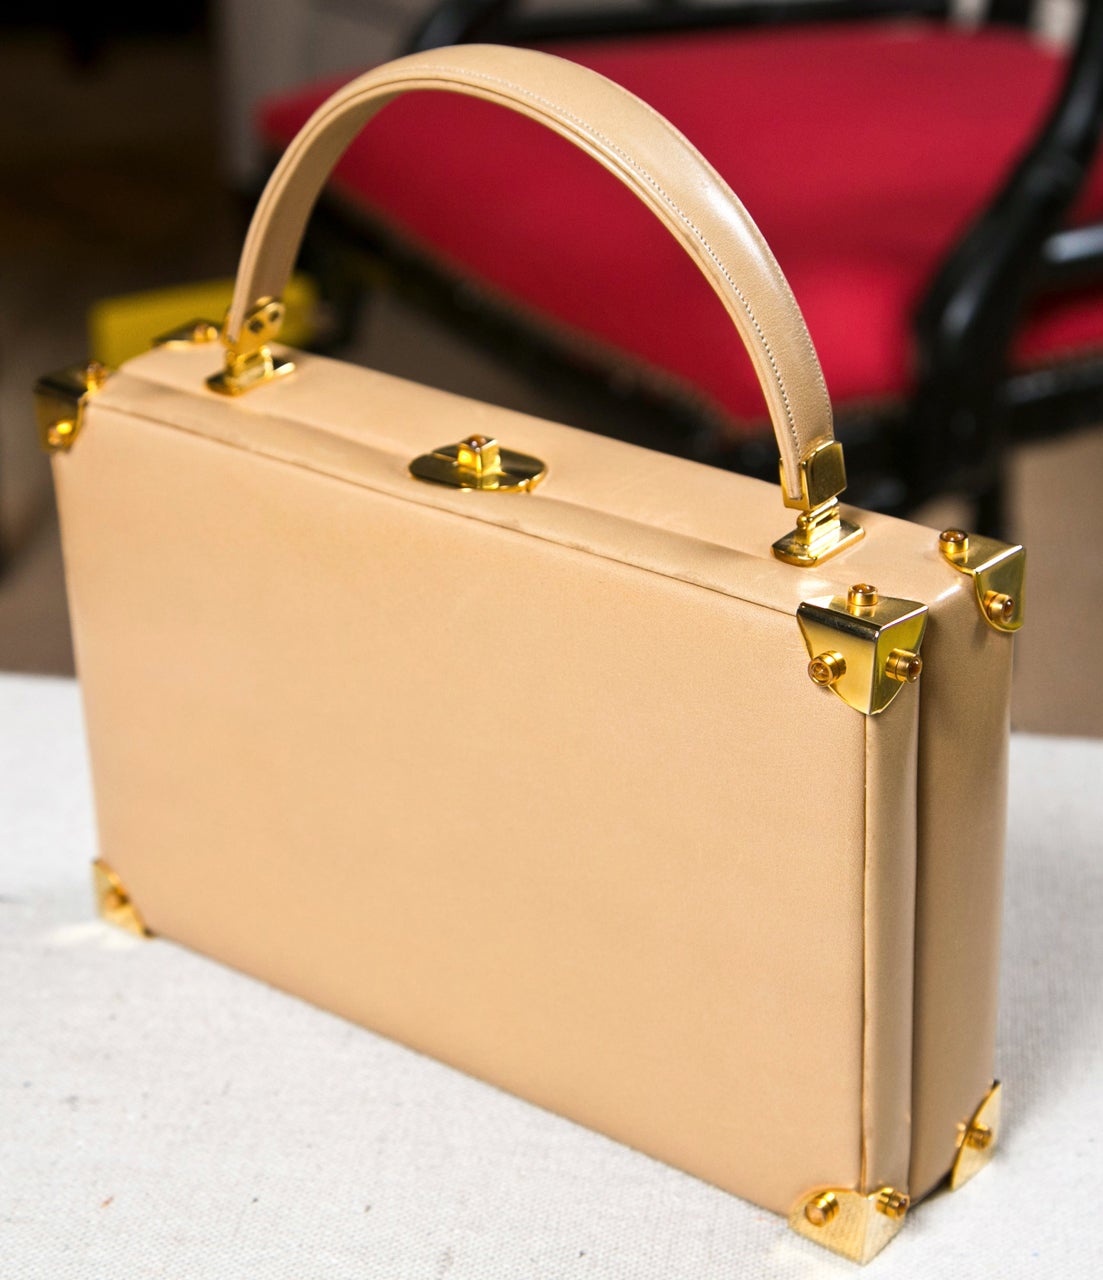 funkyfinders is sharing this sleek purse from the house of judith leiber. classic styling with handsome brass hardware makes this purse ready to wear for all occasions, indeed all year...
designer/maker
 judith leiber
 era
 circa 1970s/1980s